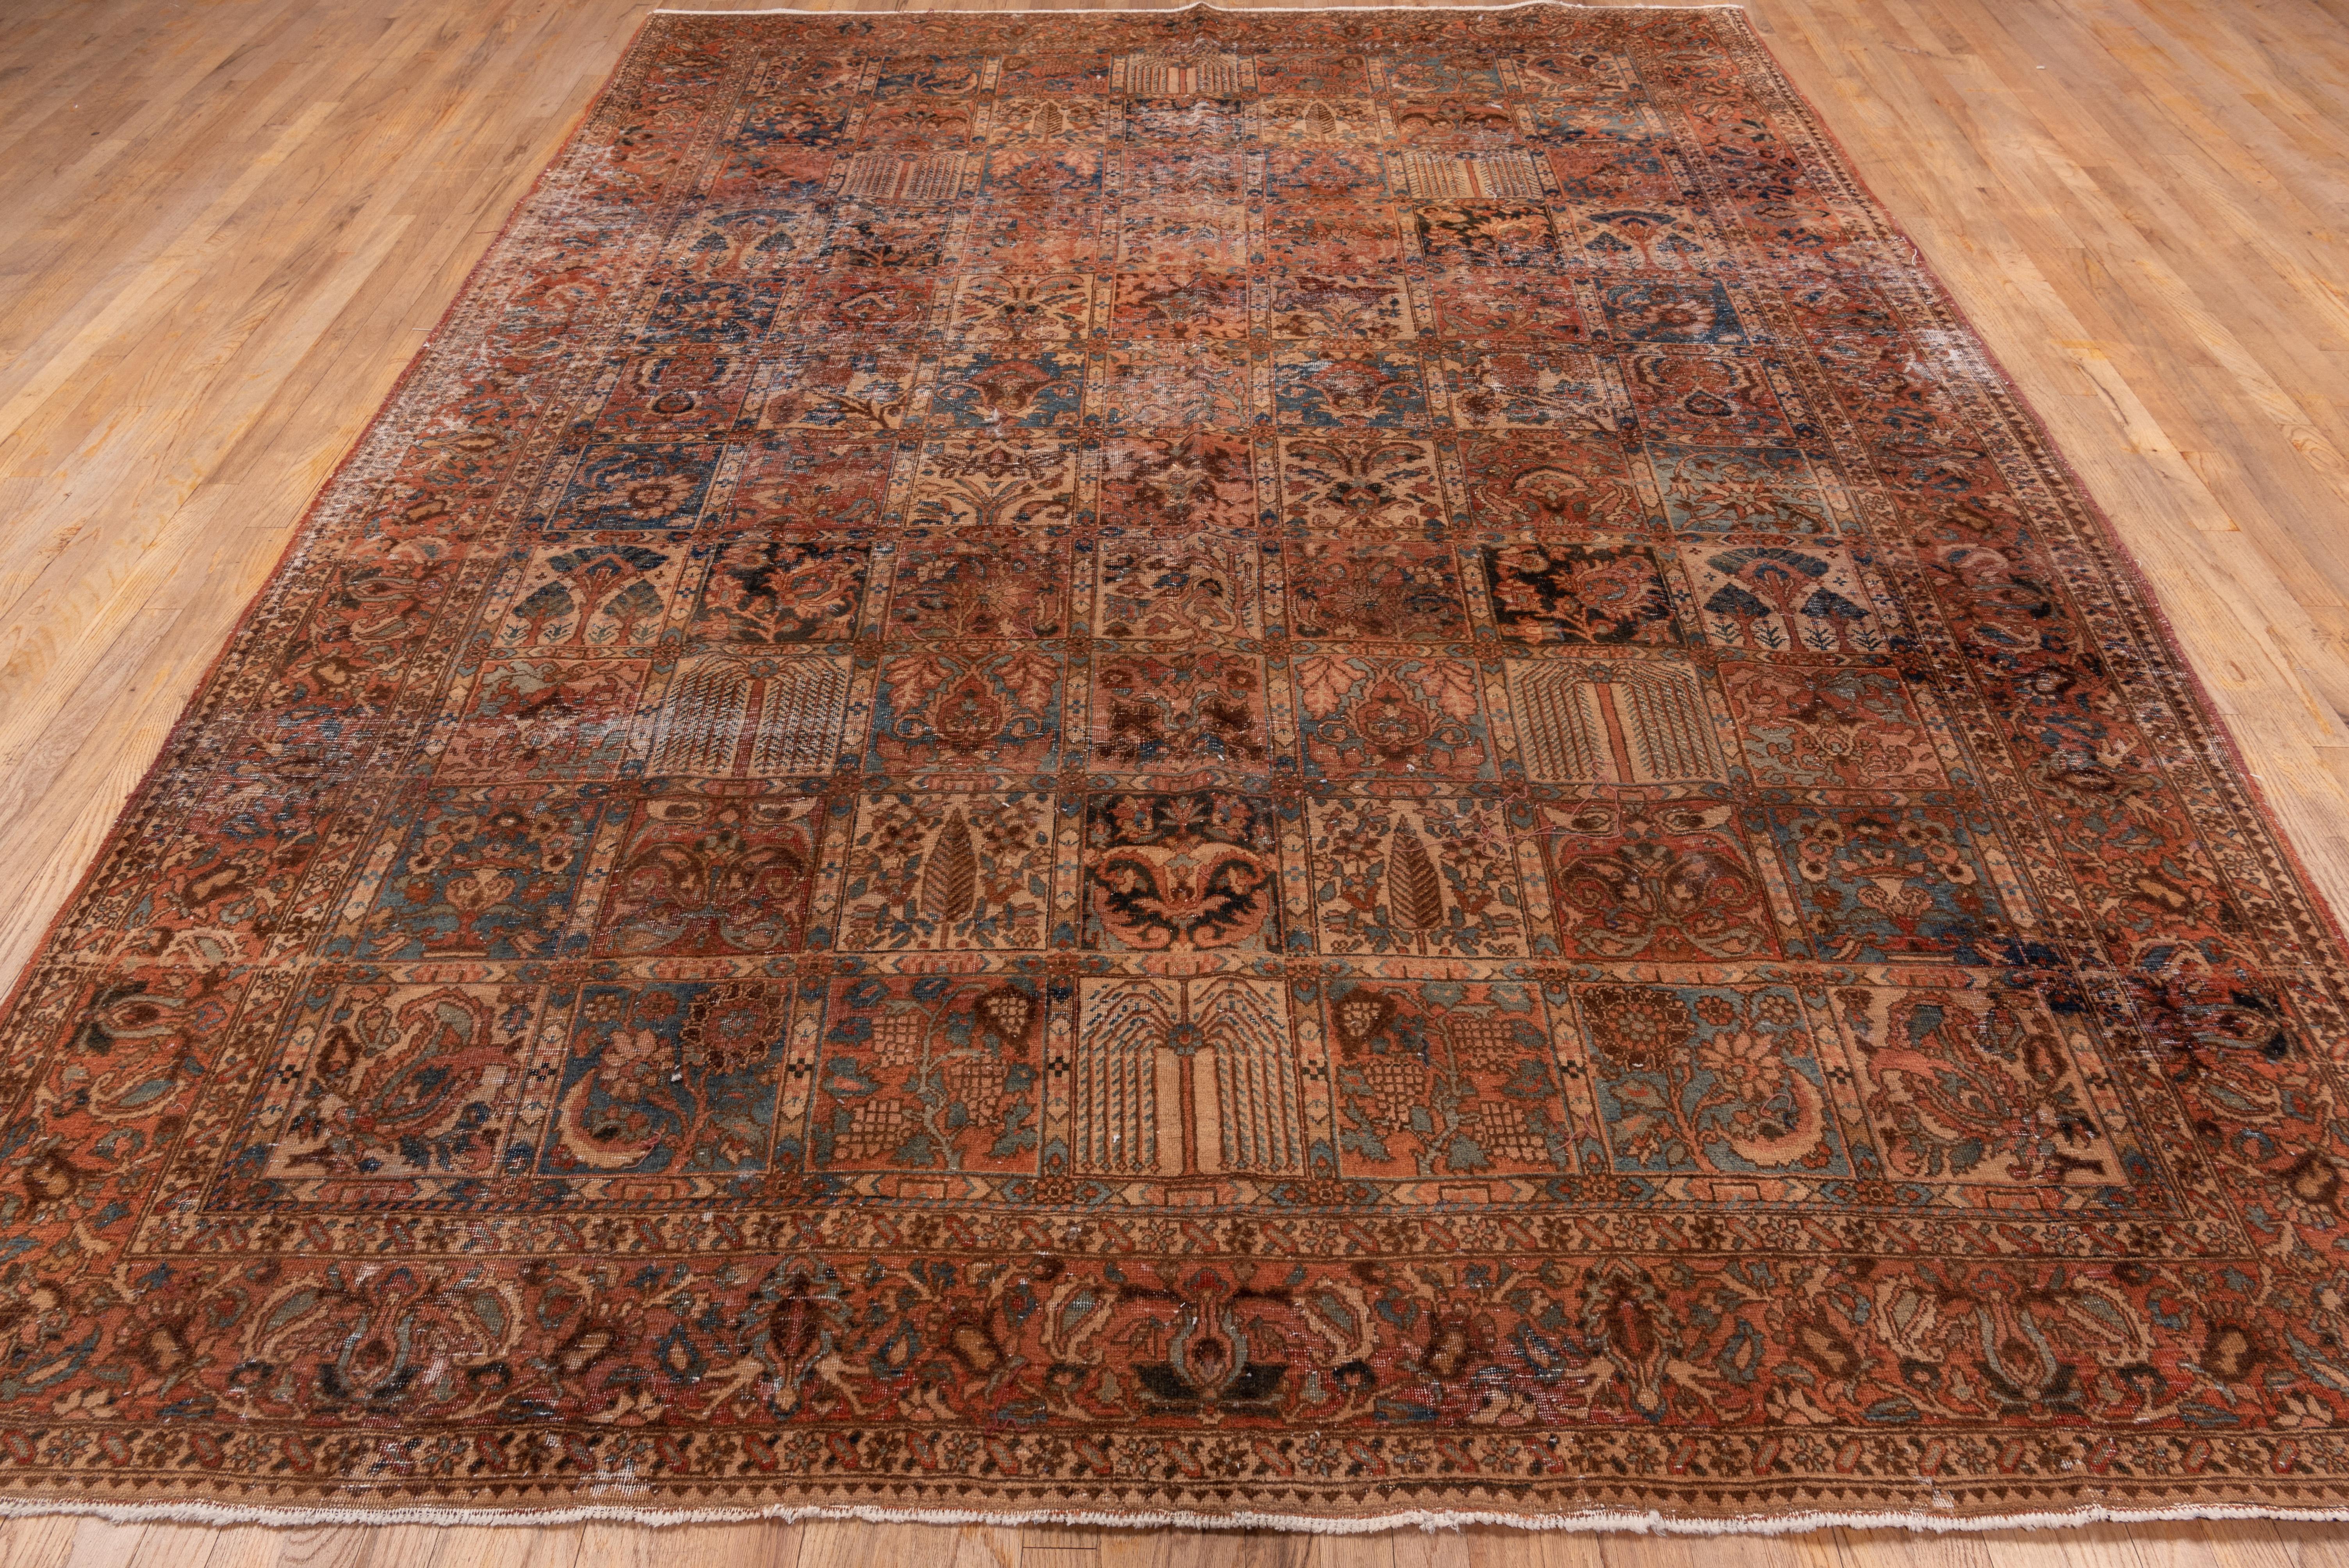 
Bakhtiari rugs, also known as Bakhtiar rugs or Bakhtiari carpets, are a type of Persian rug that originated in the Bakhtiari tribe's region in southwestern Iran. The Bakhtiari people are one of the largest Iranian tribal groups and are renowned for